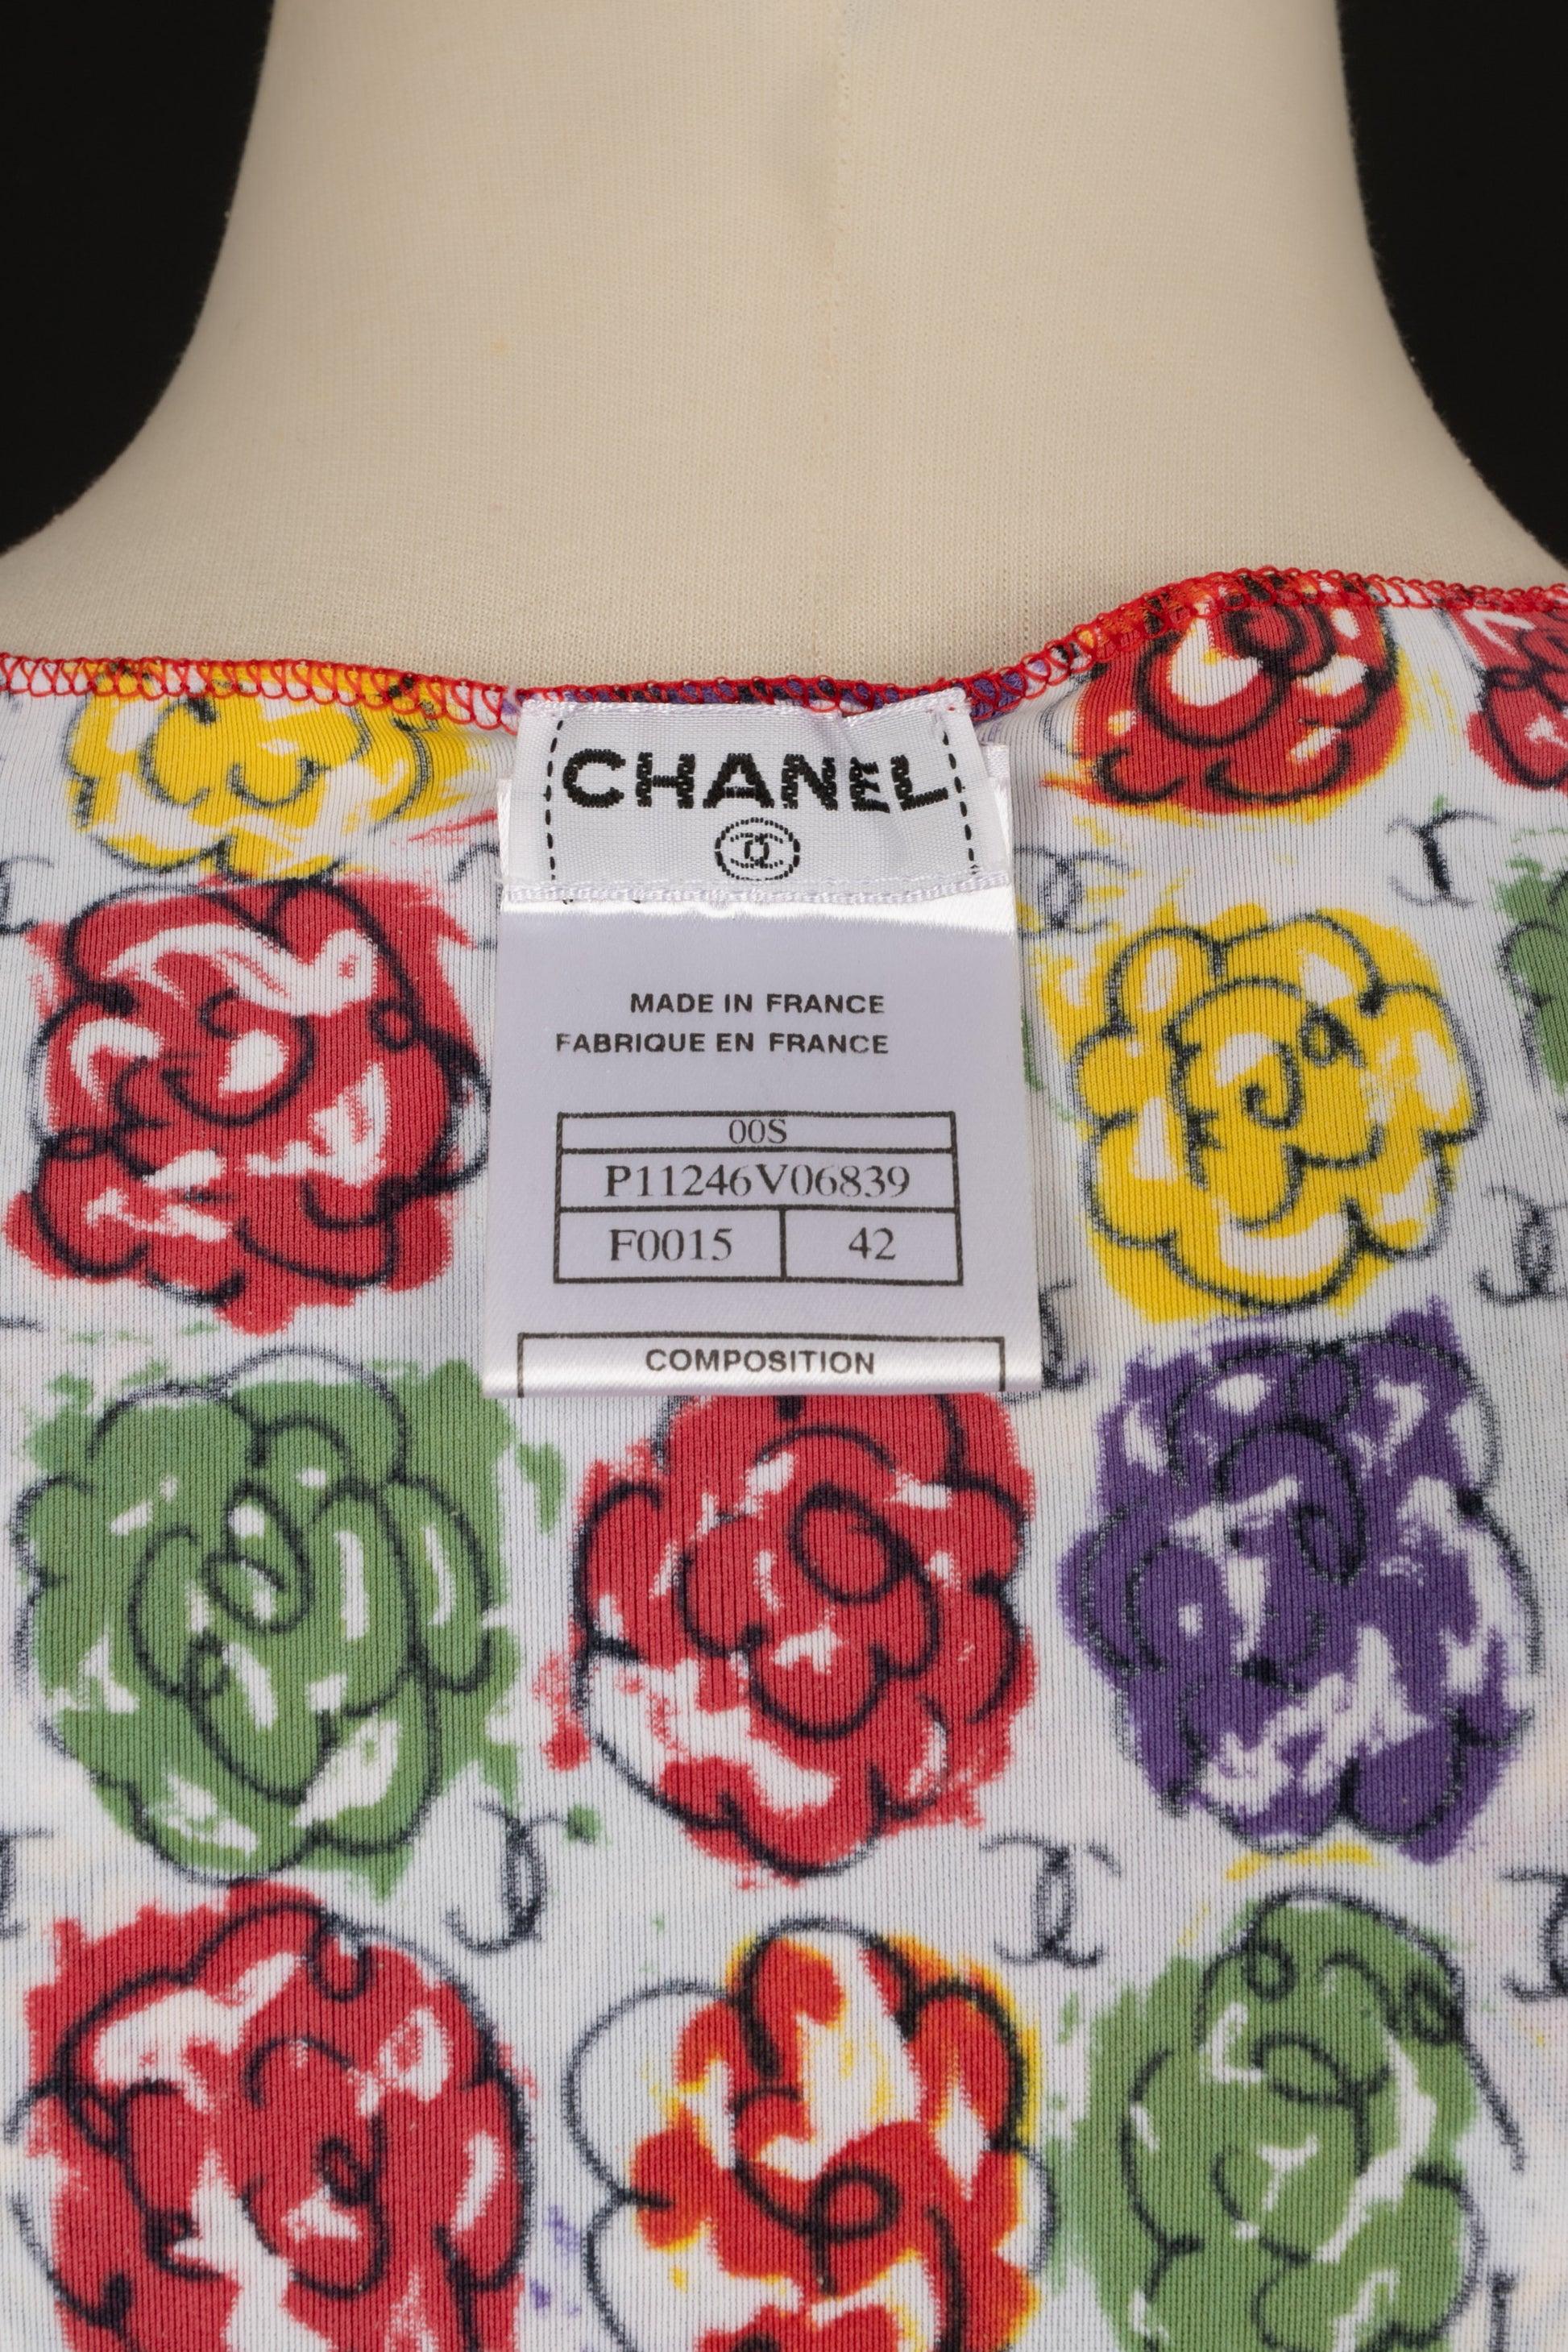 Chanel Floral Pattern Spring Top, 2000 For Sale 3